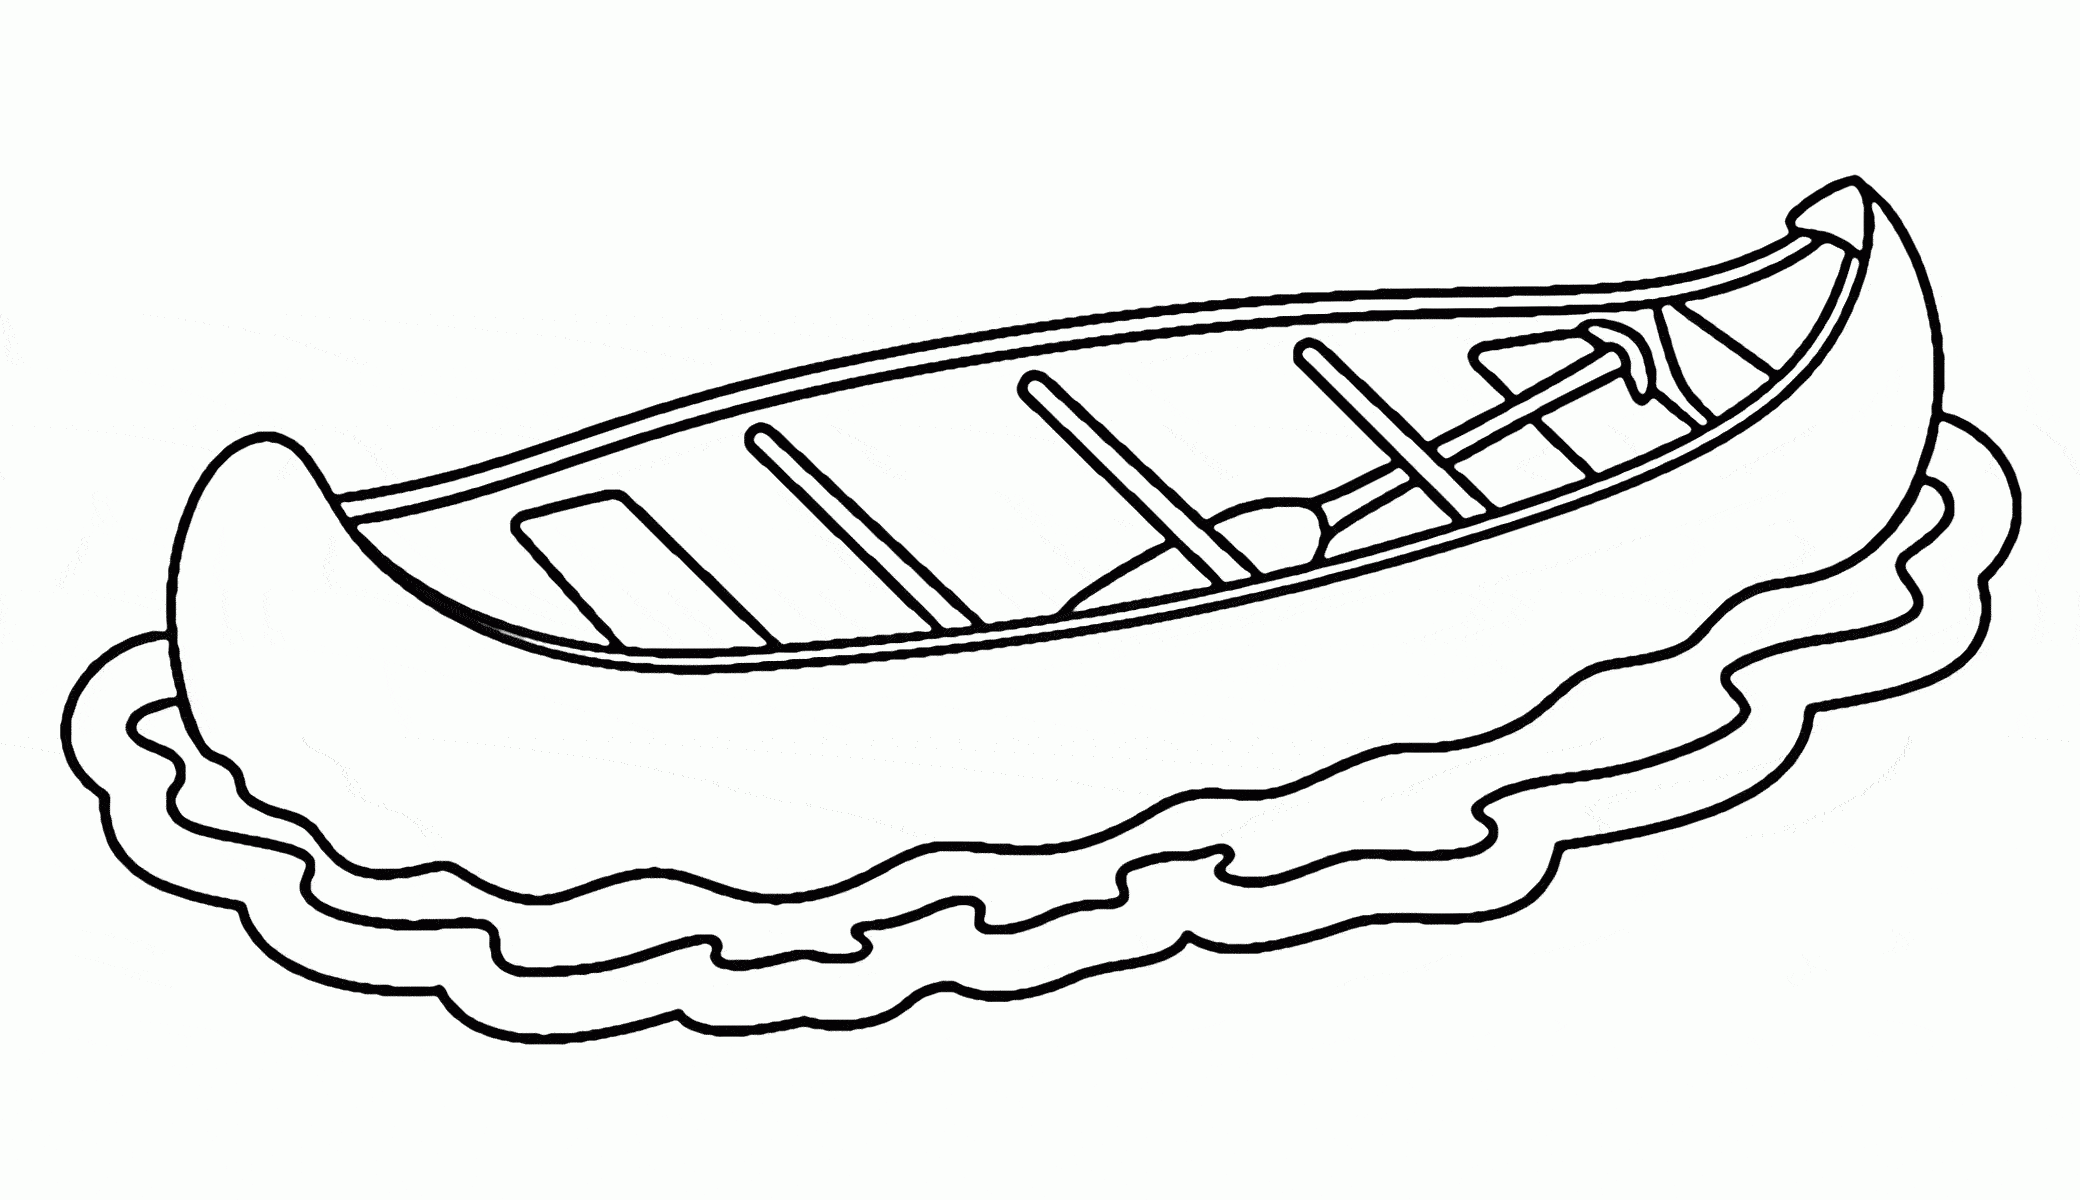 canoe coloring page for kids